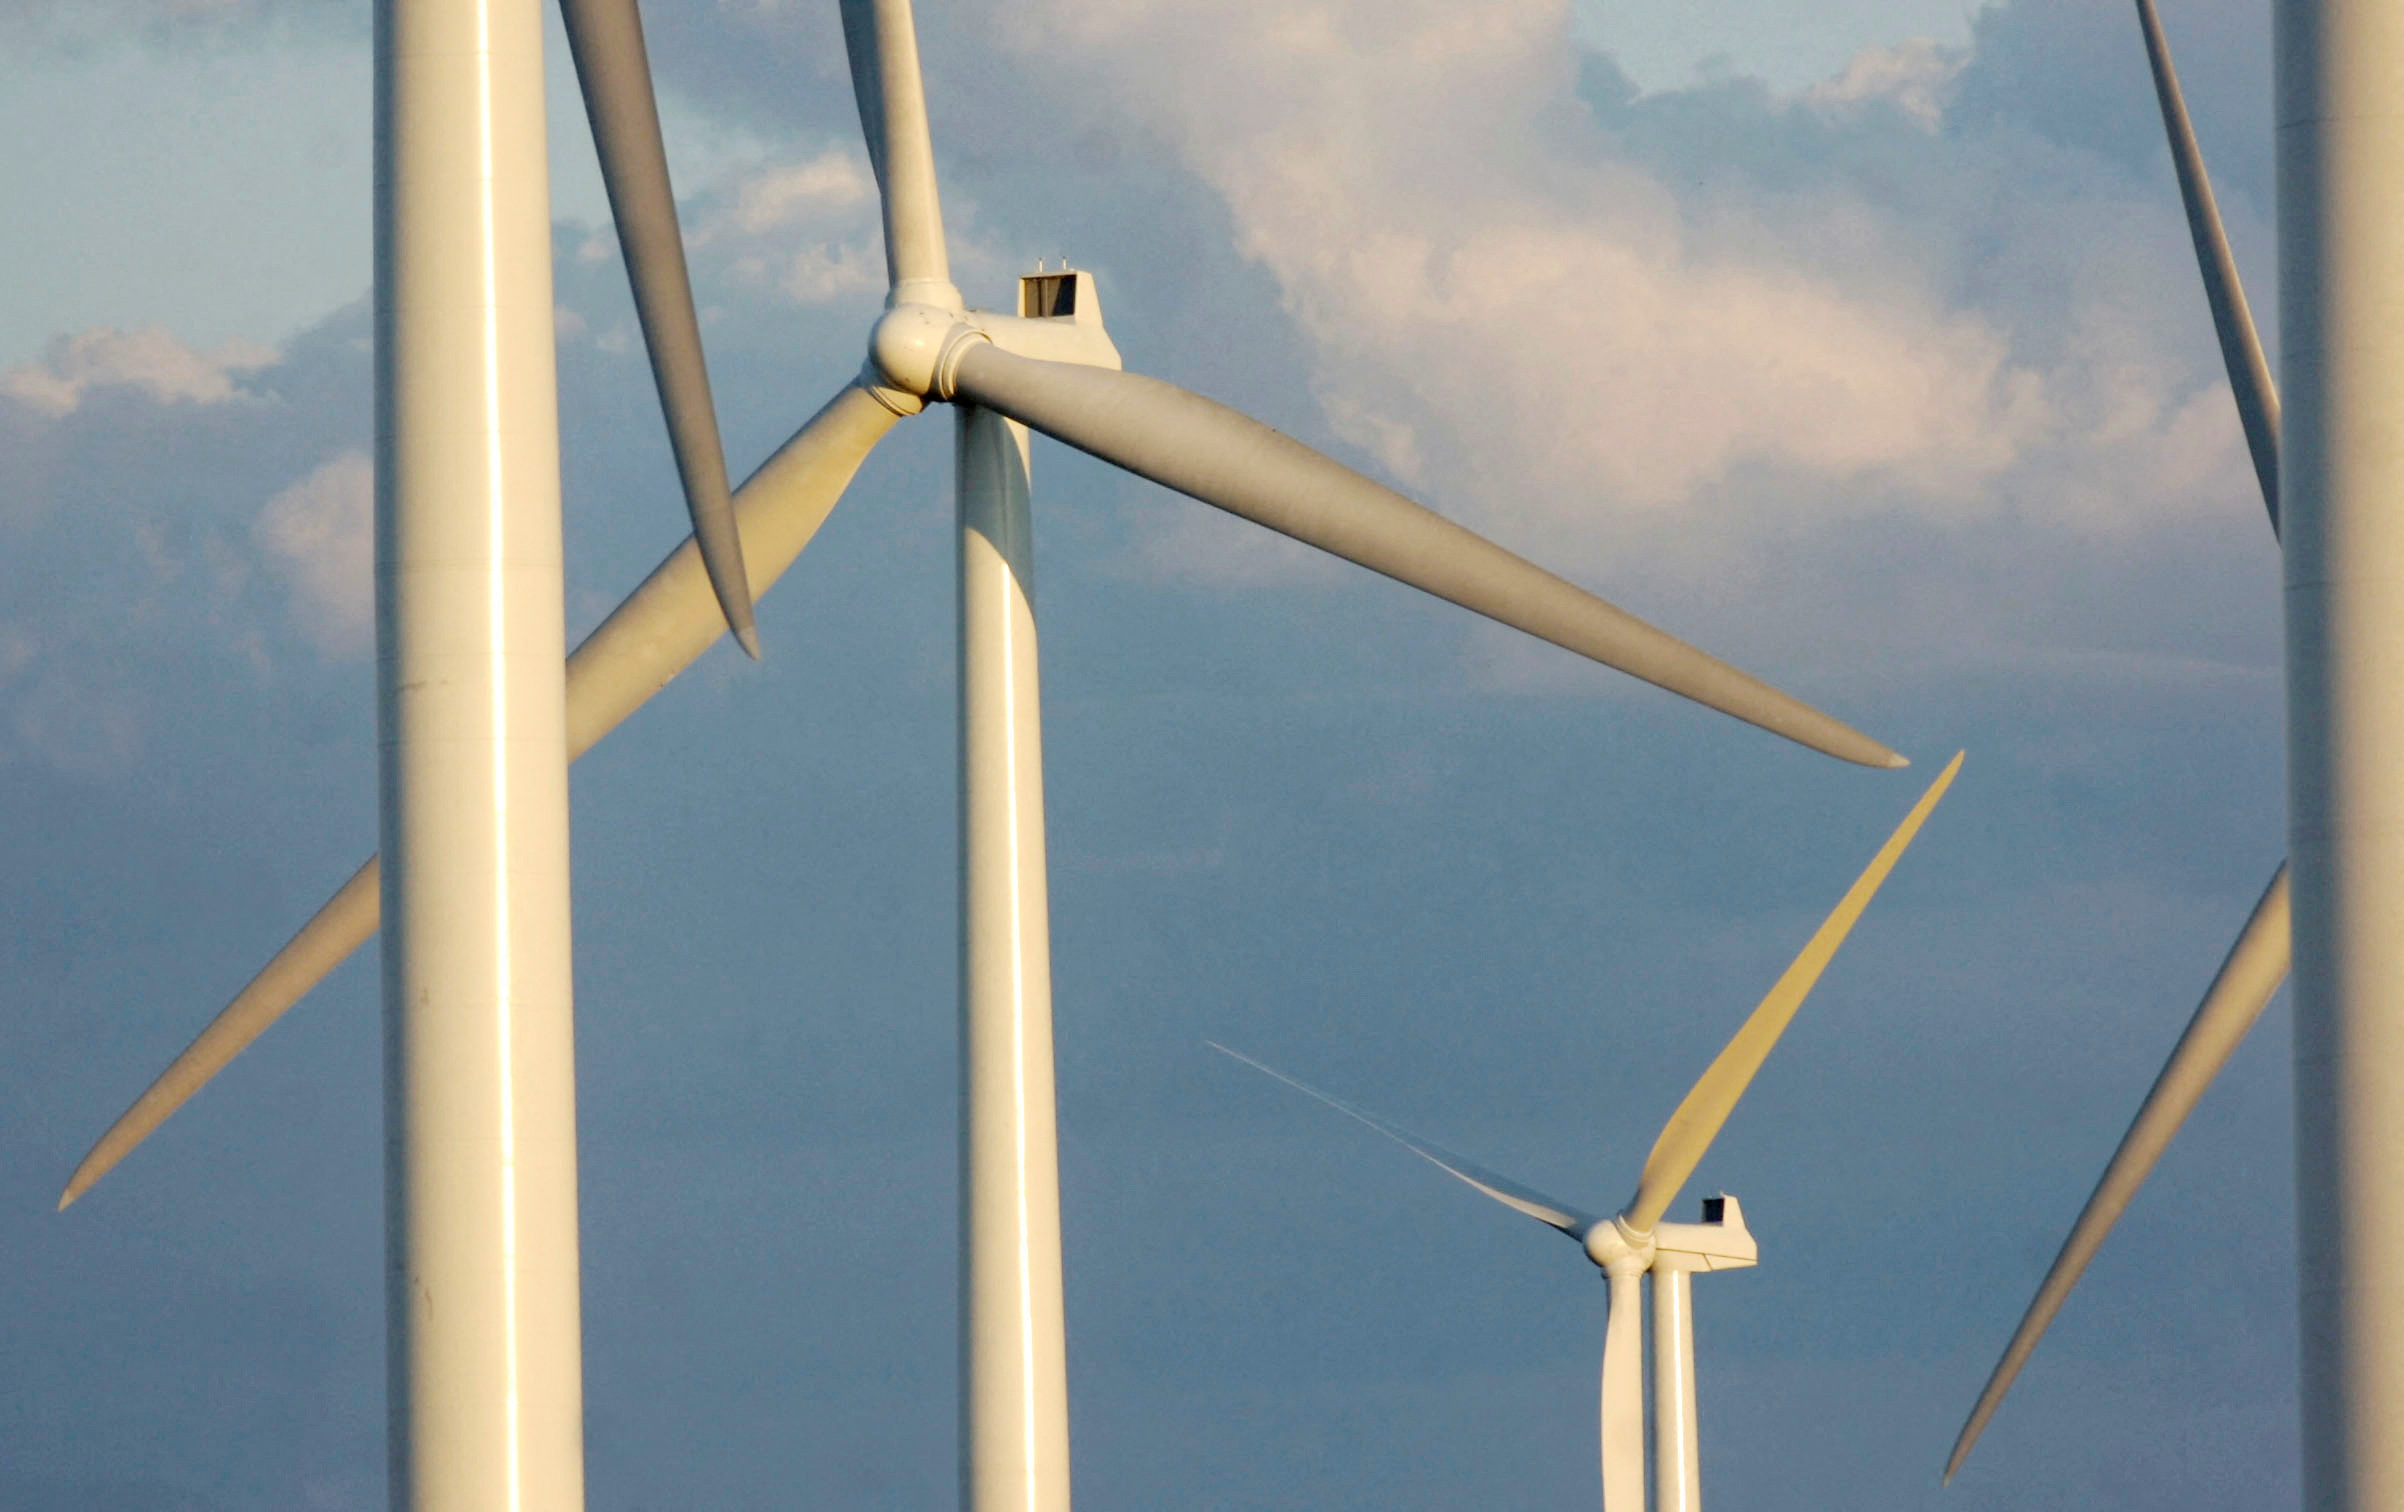 WindEconomics: Installed costs for onshore wind continue to fall despite  rising turbine prices